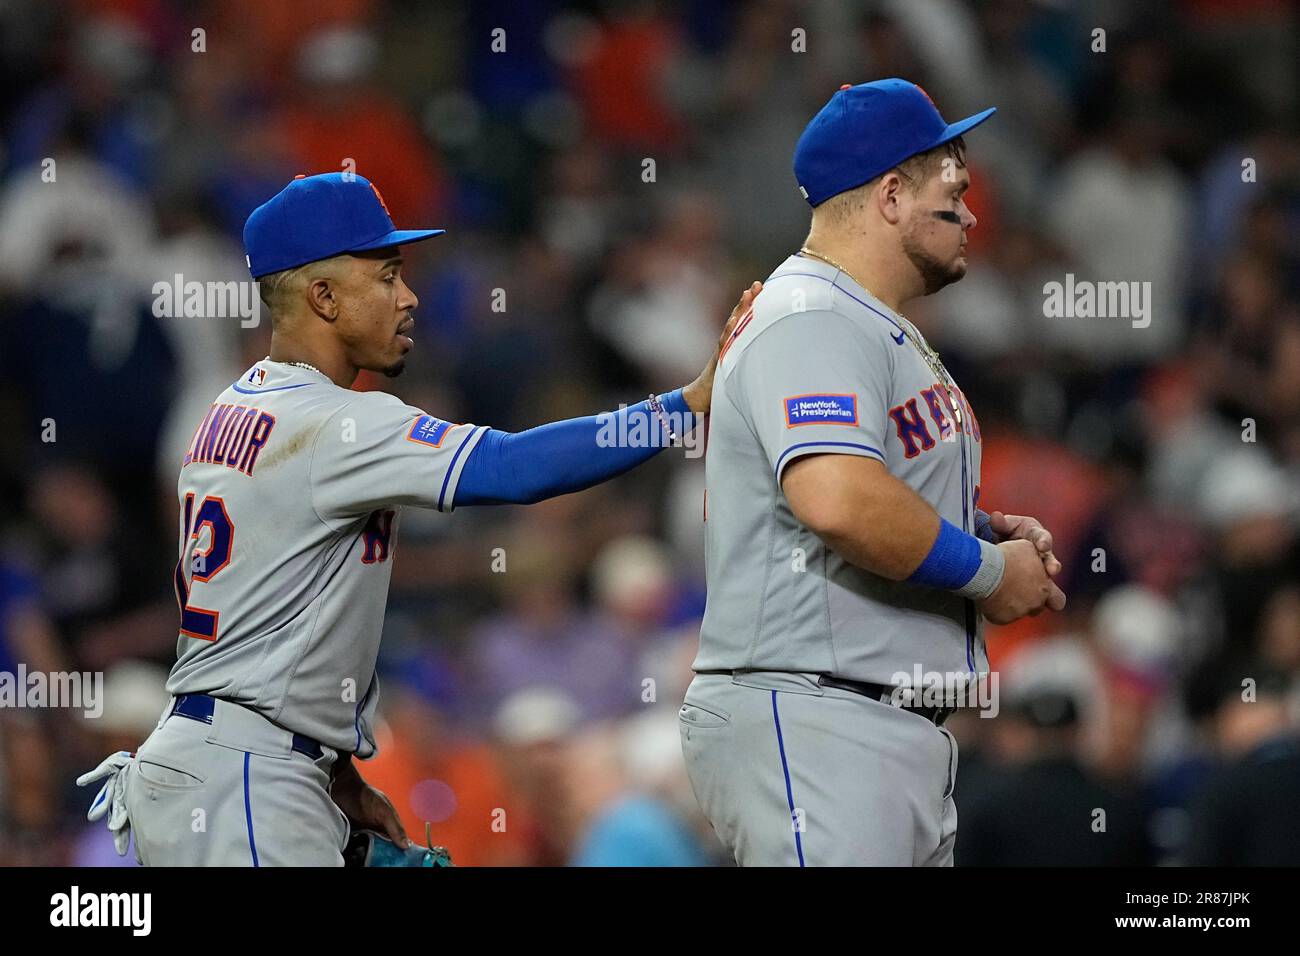 New York Mets' Francisco Lindor (12) and Daniel Vogelbach celebrate after a  baseball game against the Houston Astros Monday, June 19, 2023, in Houston.  The Mets won 11-1. (AP Photo/David J. Phillip